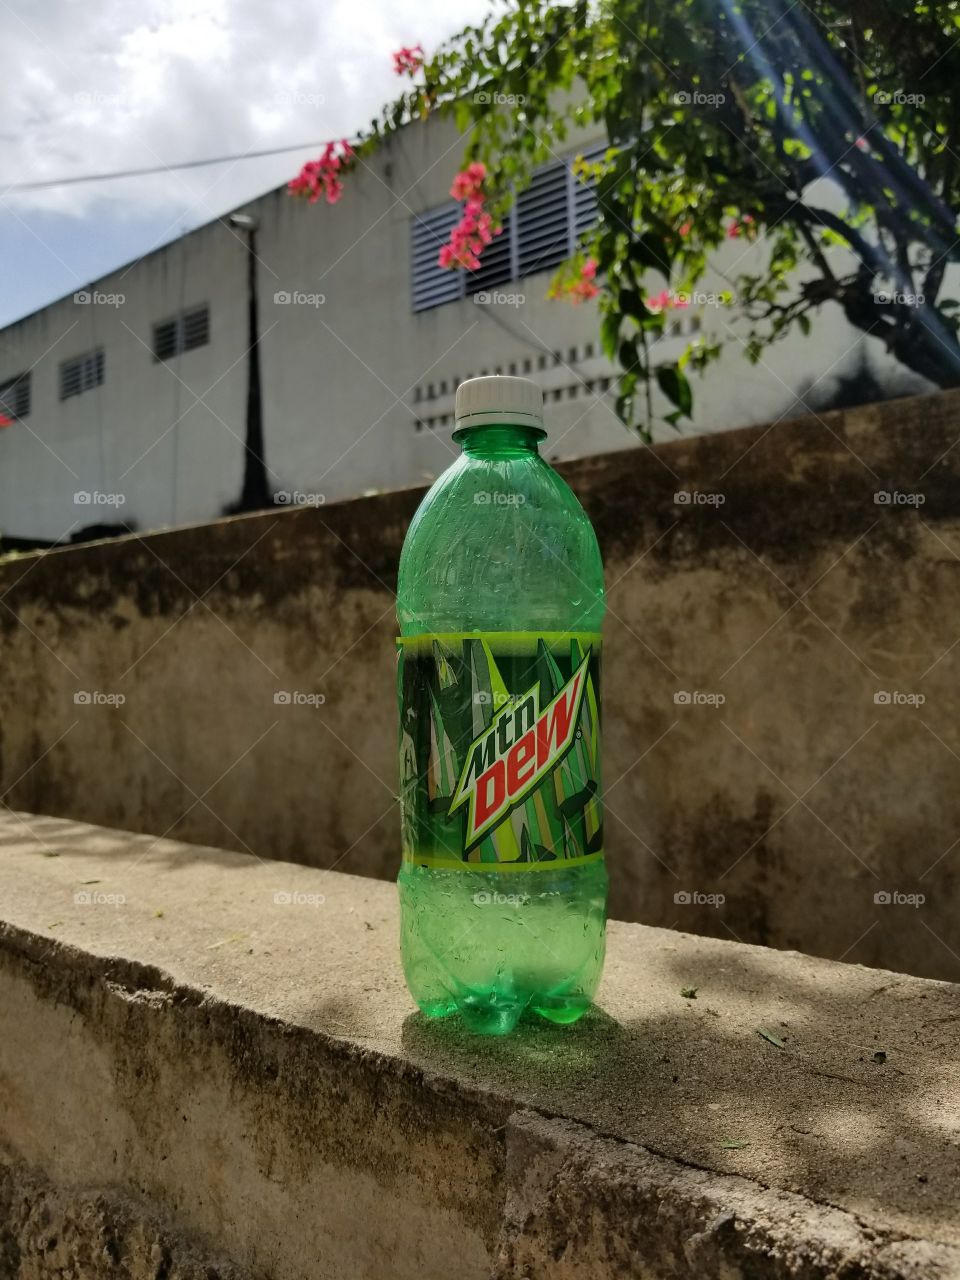 The only time mountain dew looked appealing